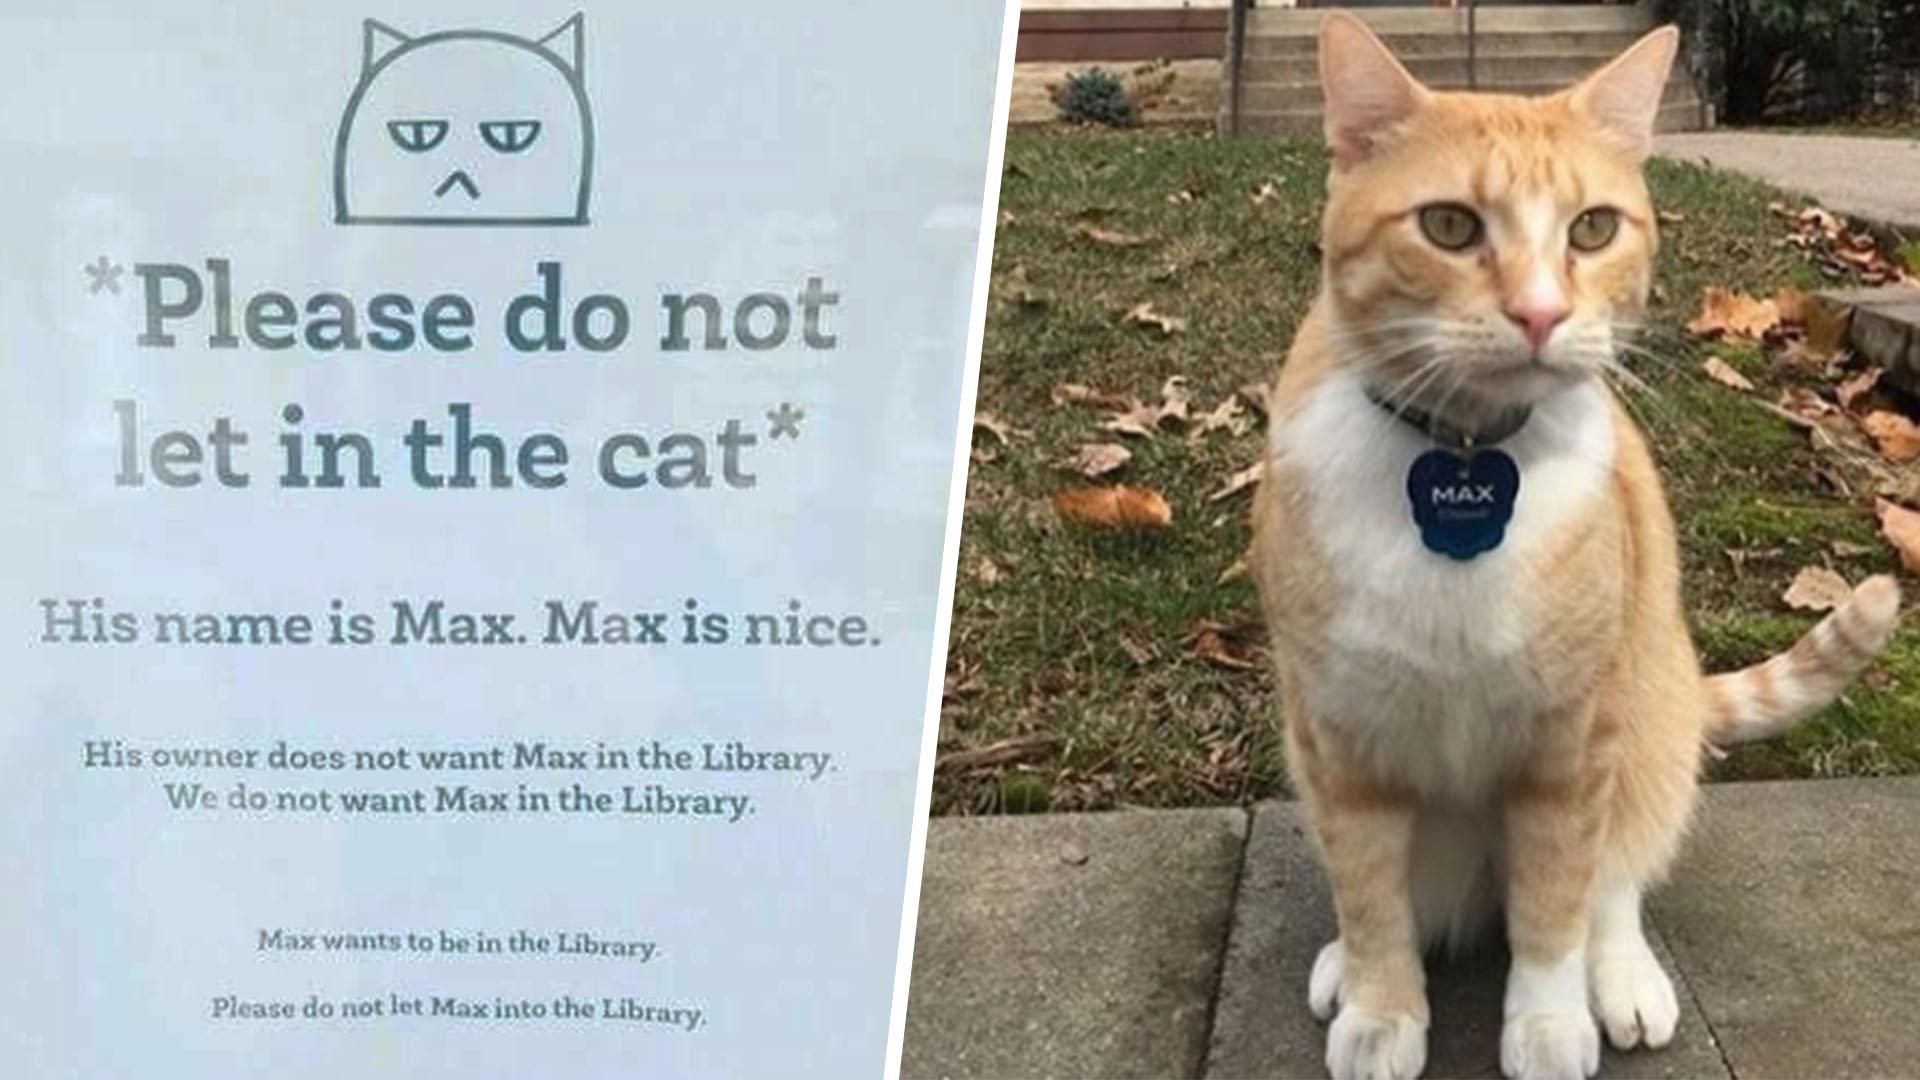 Max the cat is banned from the library.